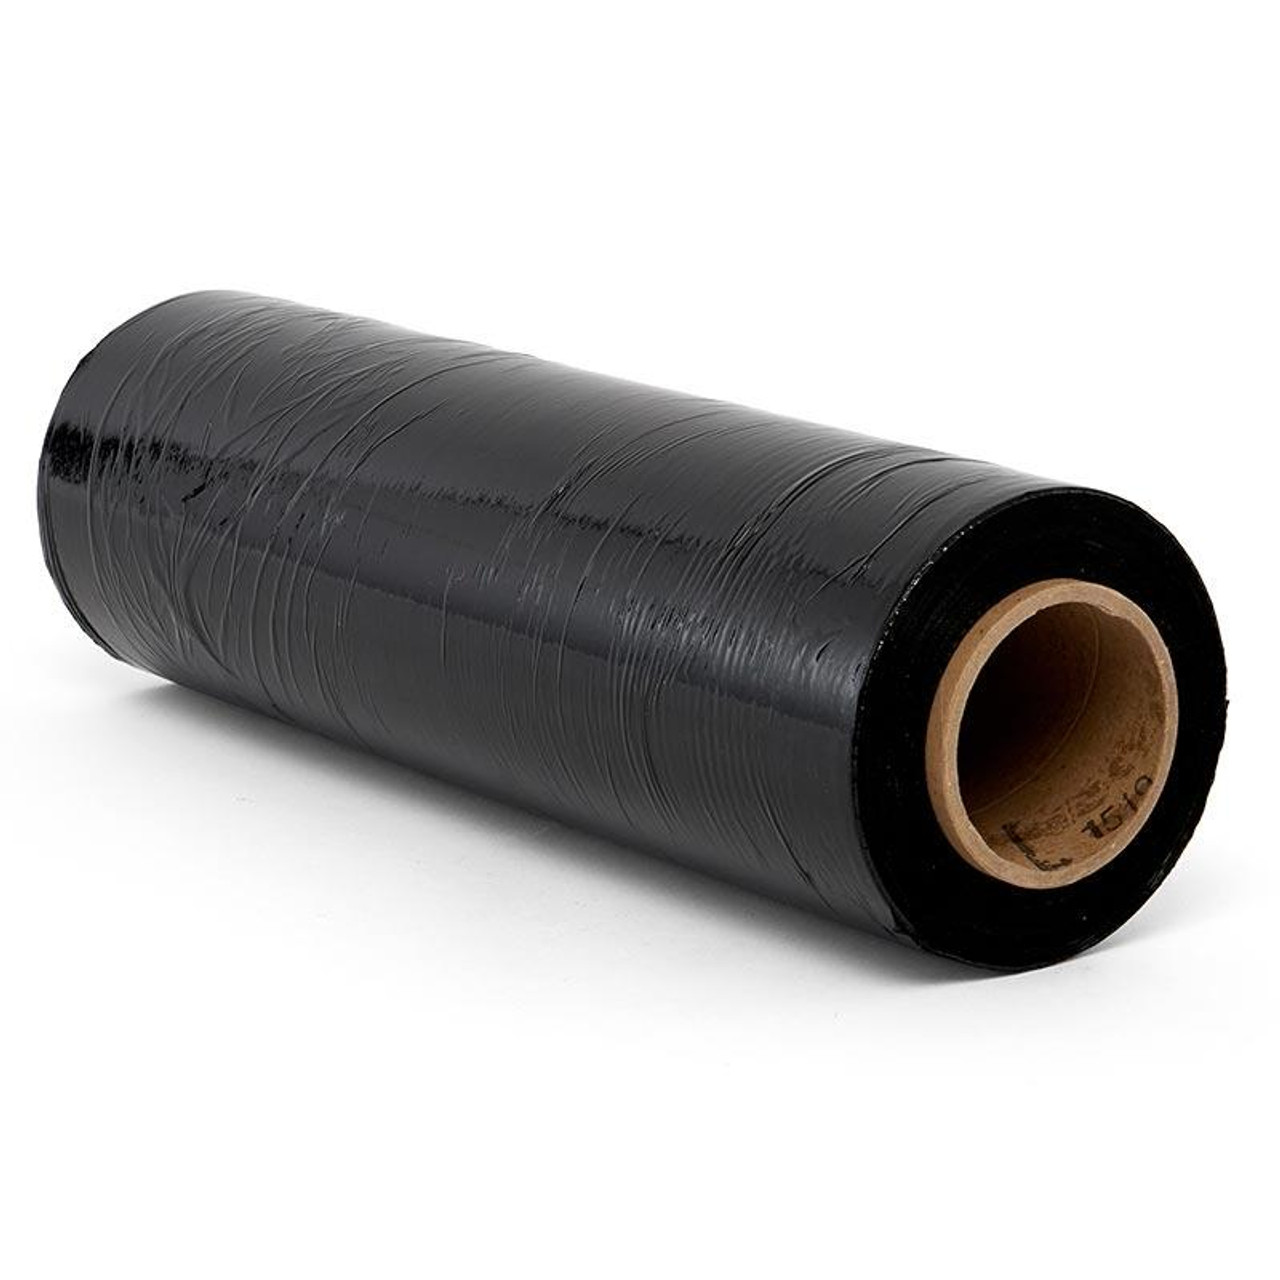  YXX-TECH Black Stretch Film/Wrapping Paper Thickness